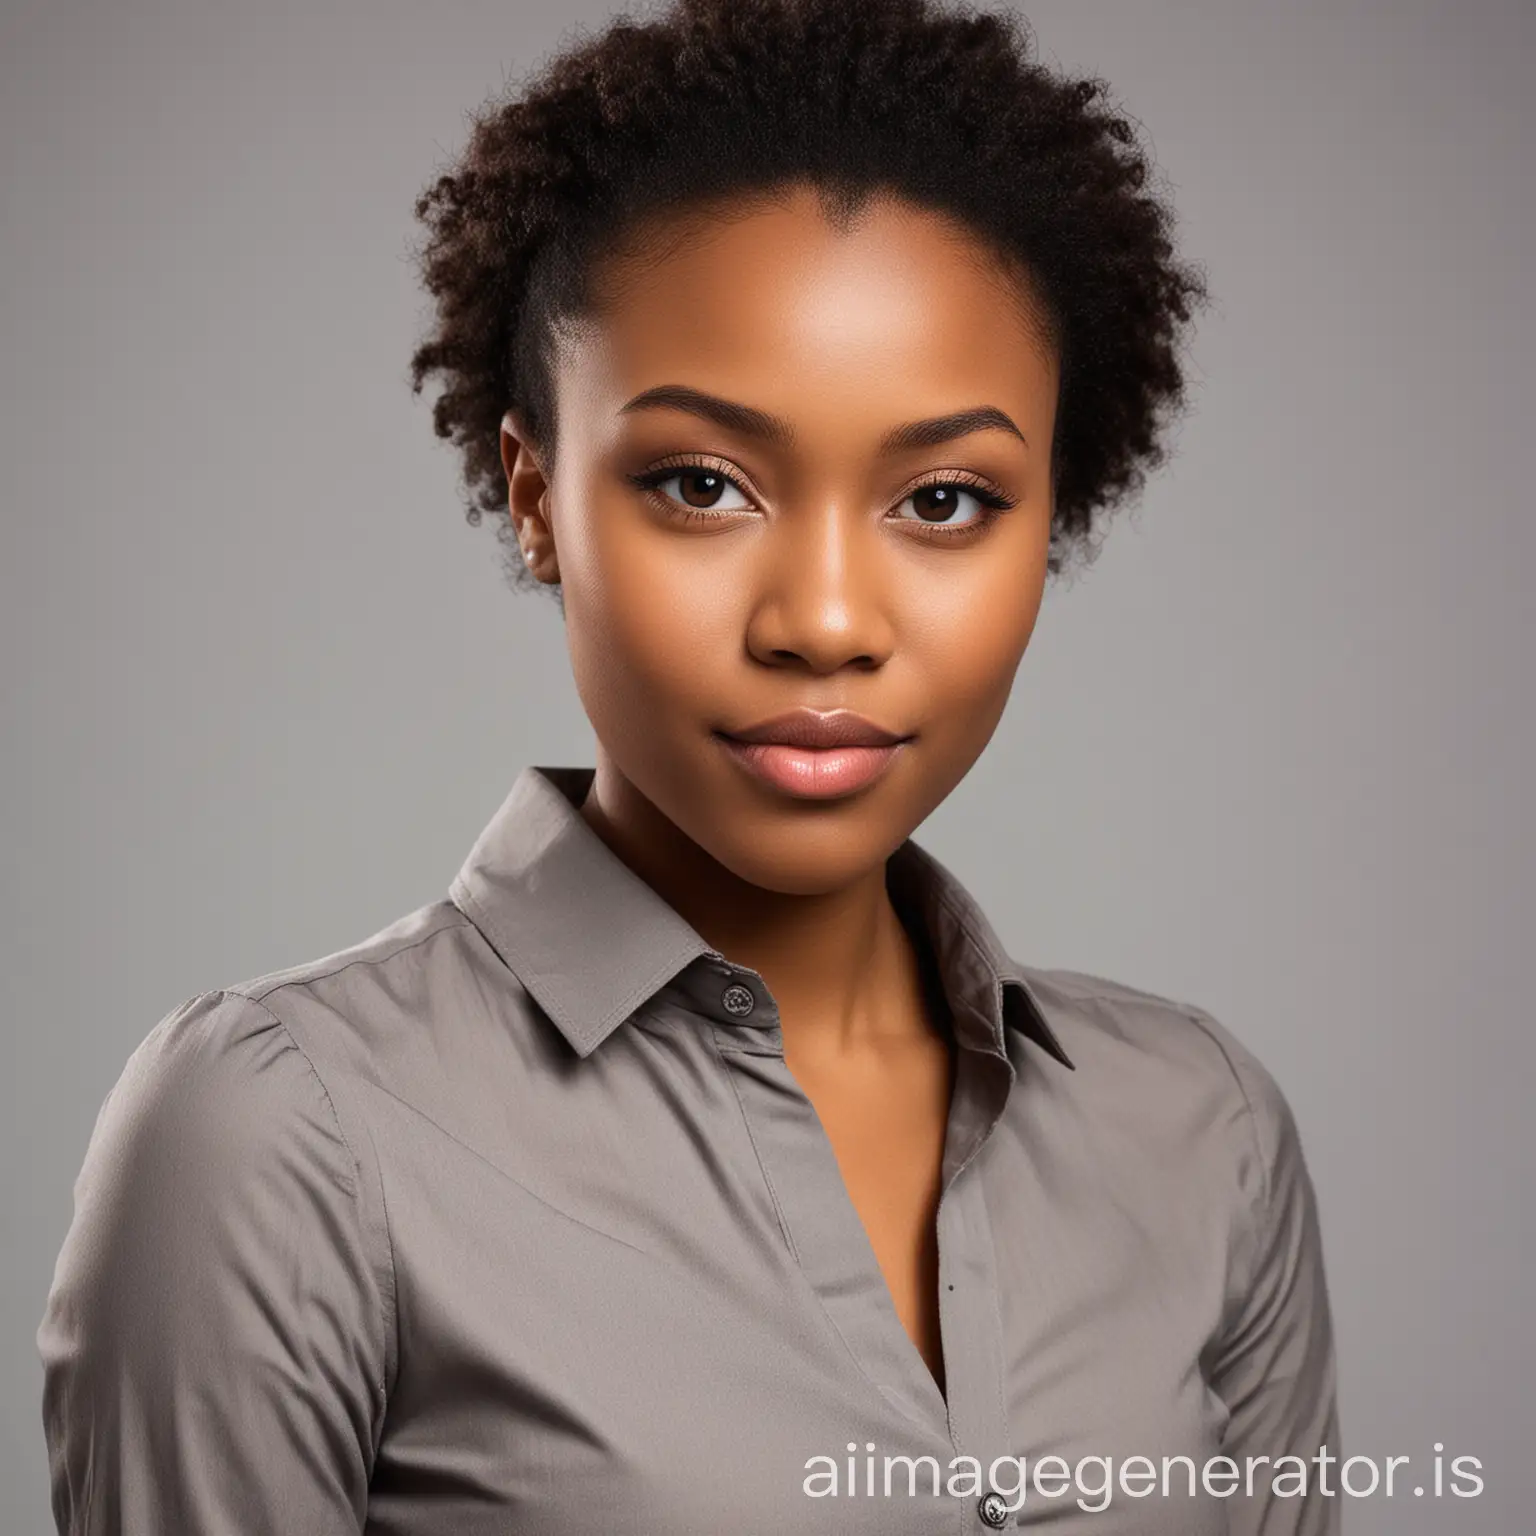 Create a professional headshot of a young, confident Nigerian lady suitable for a resume profile picture. The person should be dressed in business casual attire, such as a neatly pressed shirt or blouse, and should have a friendly, approachable expression. The background should be simple and neutral, such as a light gray or white, to keep the focus on the individual. The lighting should be soft and even, highlighting the subject's face without harsh shadows.